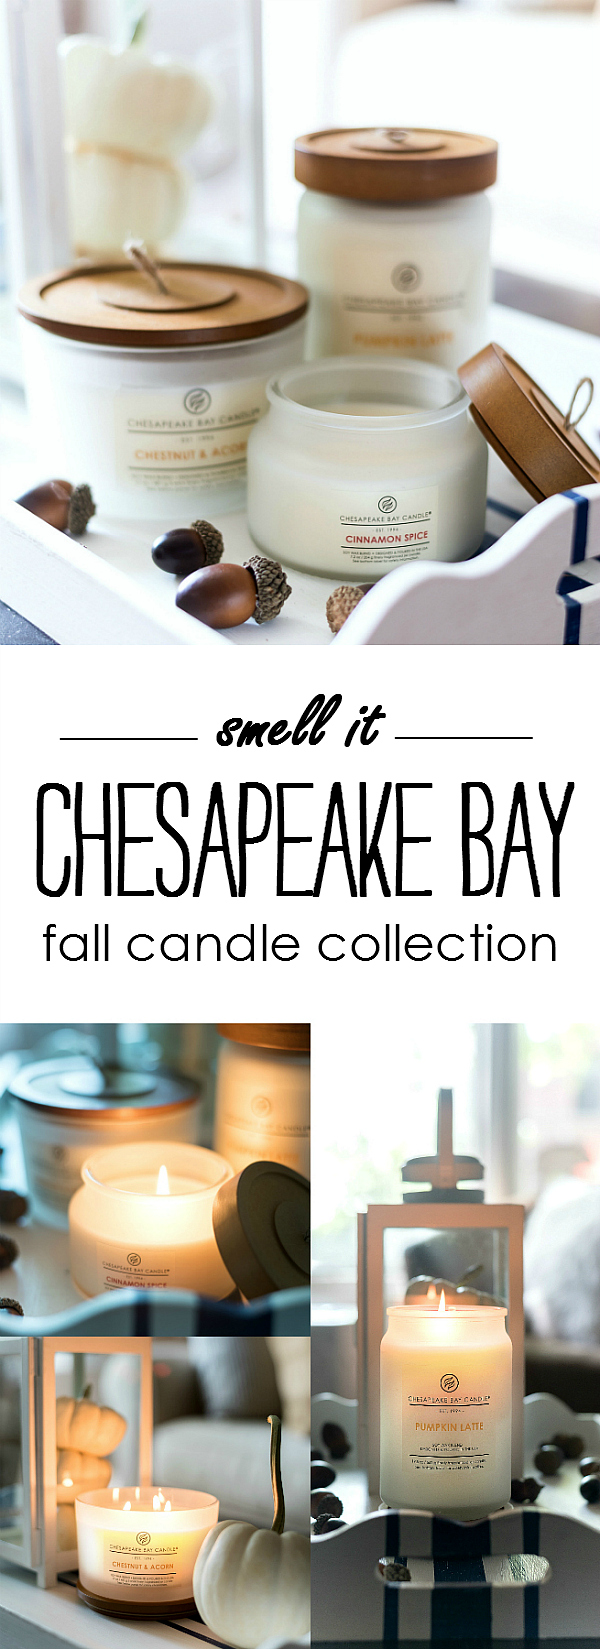 Fall Candle Collection from Chesapeake Bay Candle Heritage Collection - Pumpkin Candle, Cinnamon Candle, Vanilla Candle, Chestnut Candle, Christmas Candle